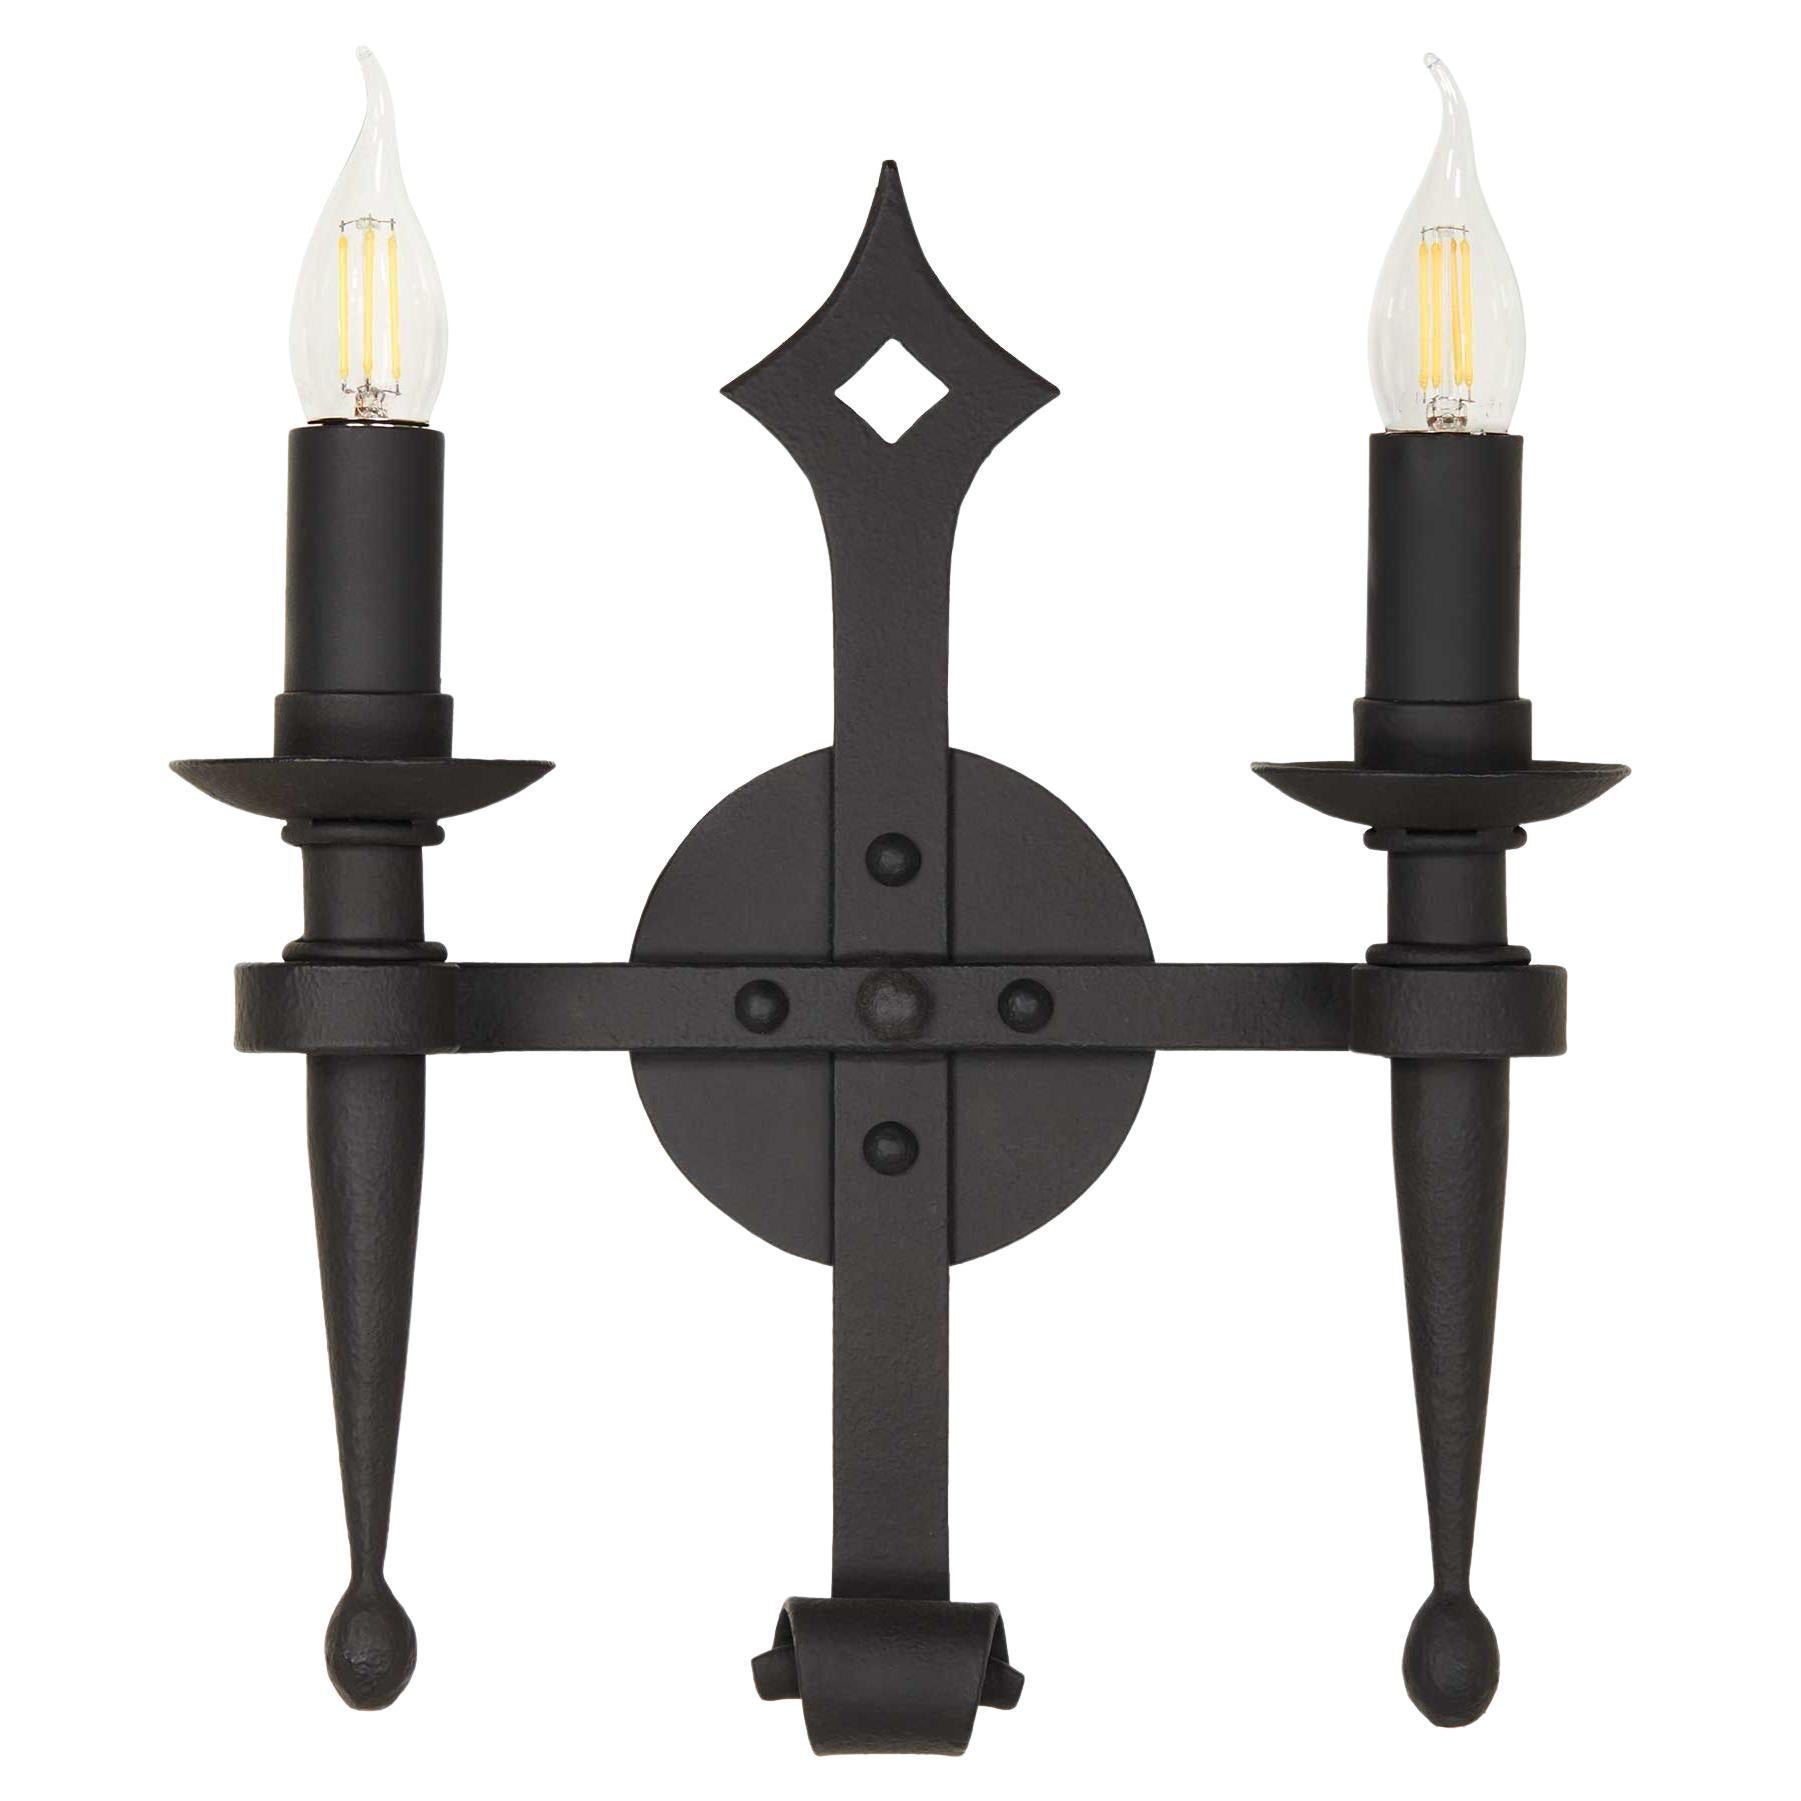  Hacienda Style Wall Sconce Spanish Colonial Wrought Iron Interior Light Fixture